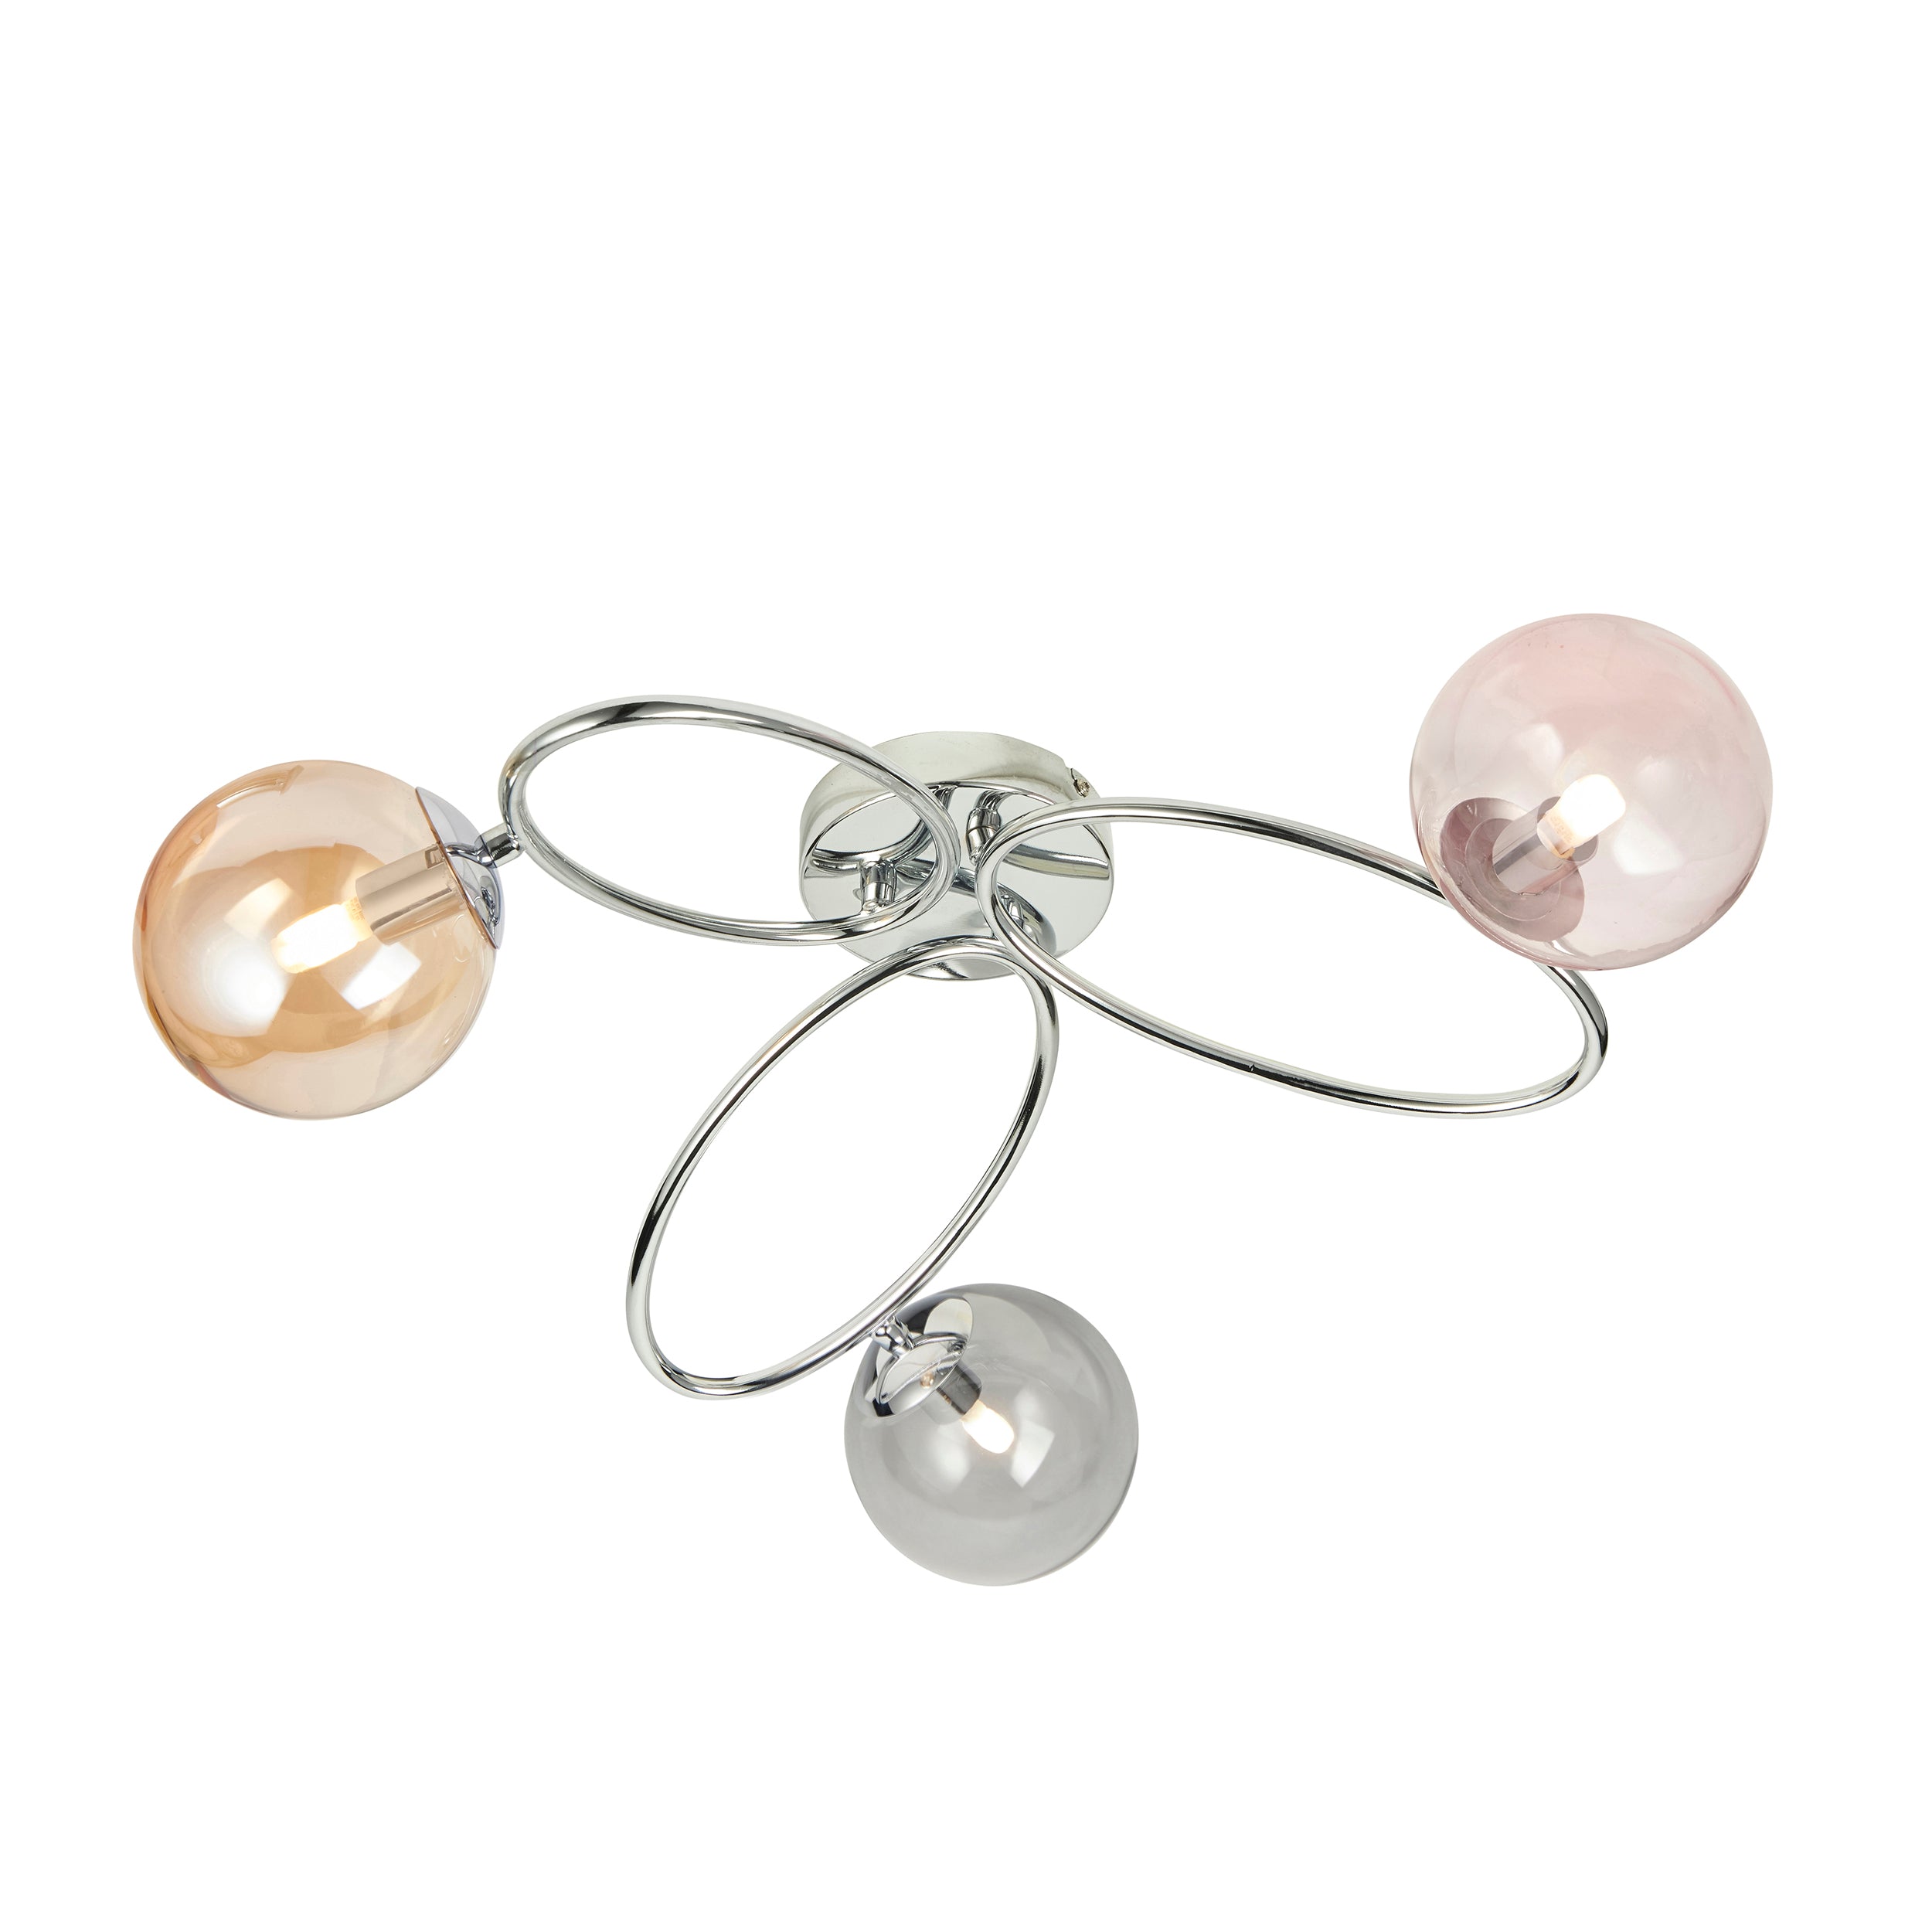 Ellipse 3 Ceiling Light. Chrome Plate With Pink, Champagne & Grey Tinted Glass